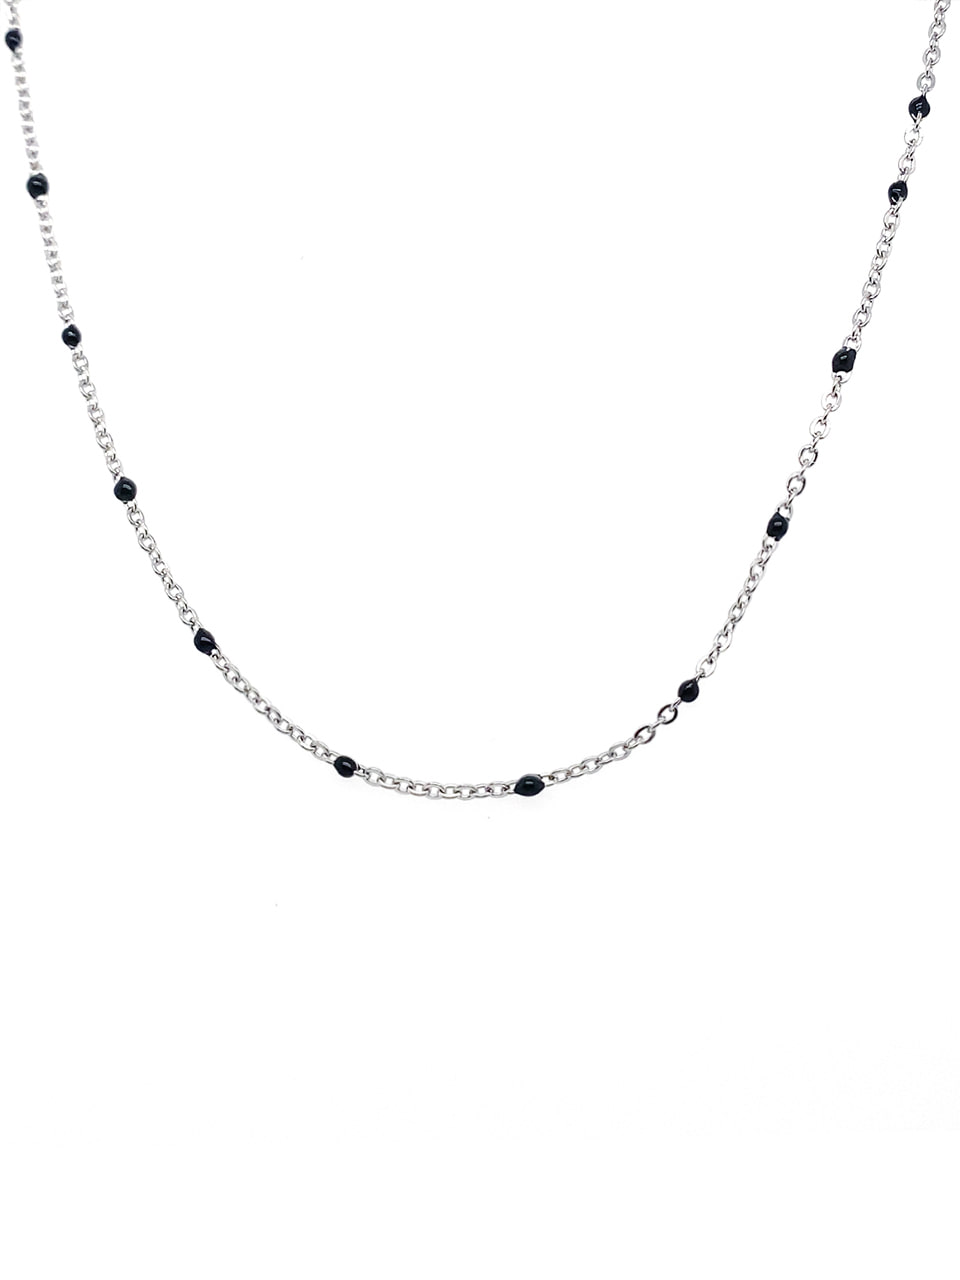 BHS211 LogoPoint Black Beads Chain Necklace